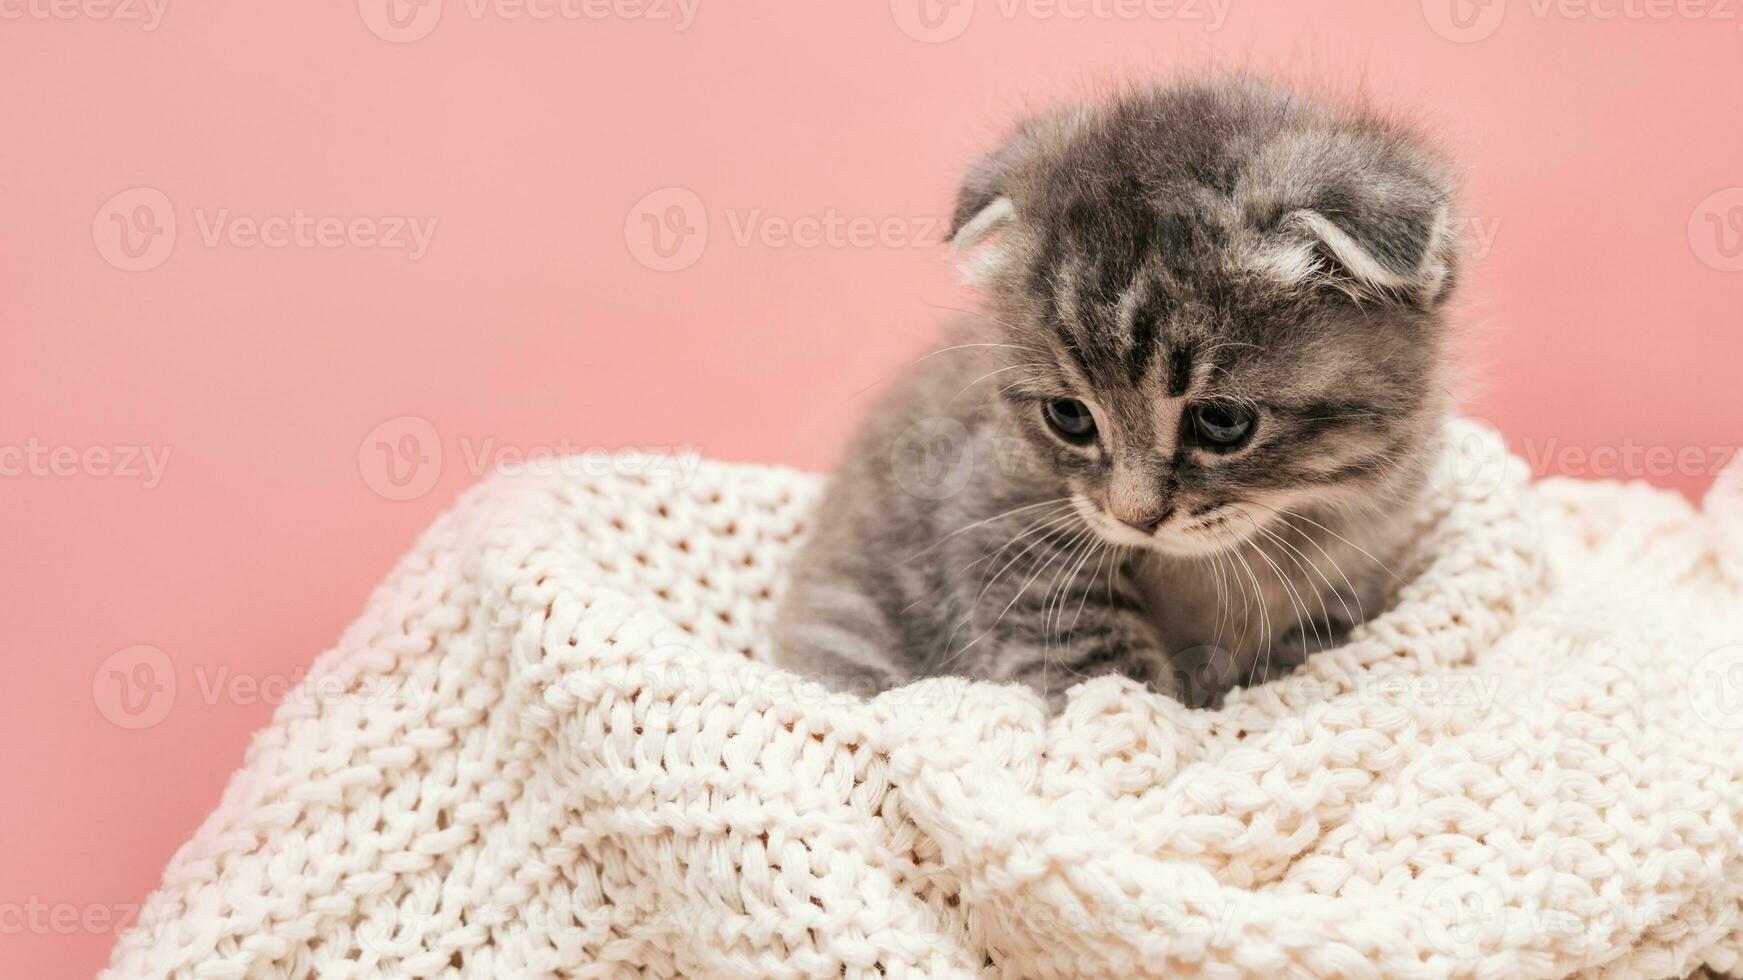 Portrait of a cute fluffy striped kitten on a light pink background with a place for your text. photo